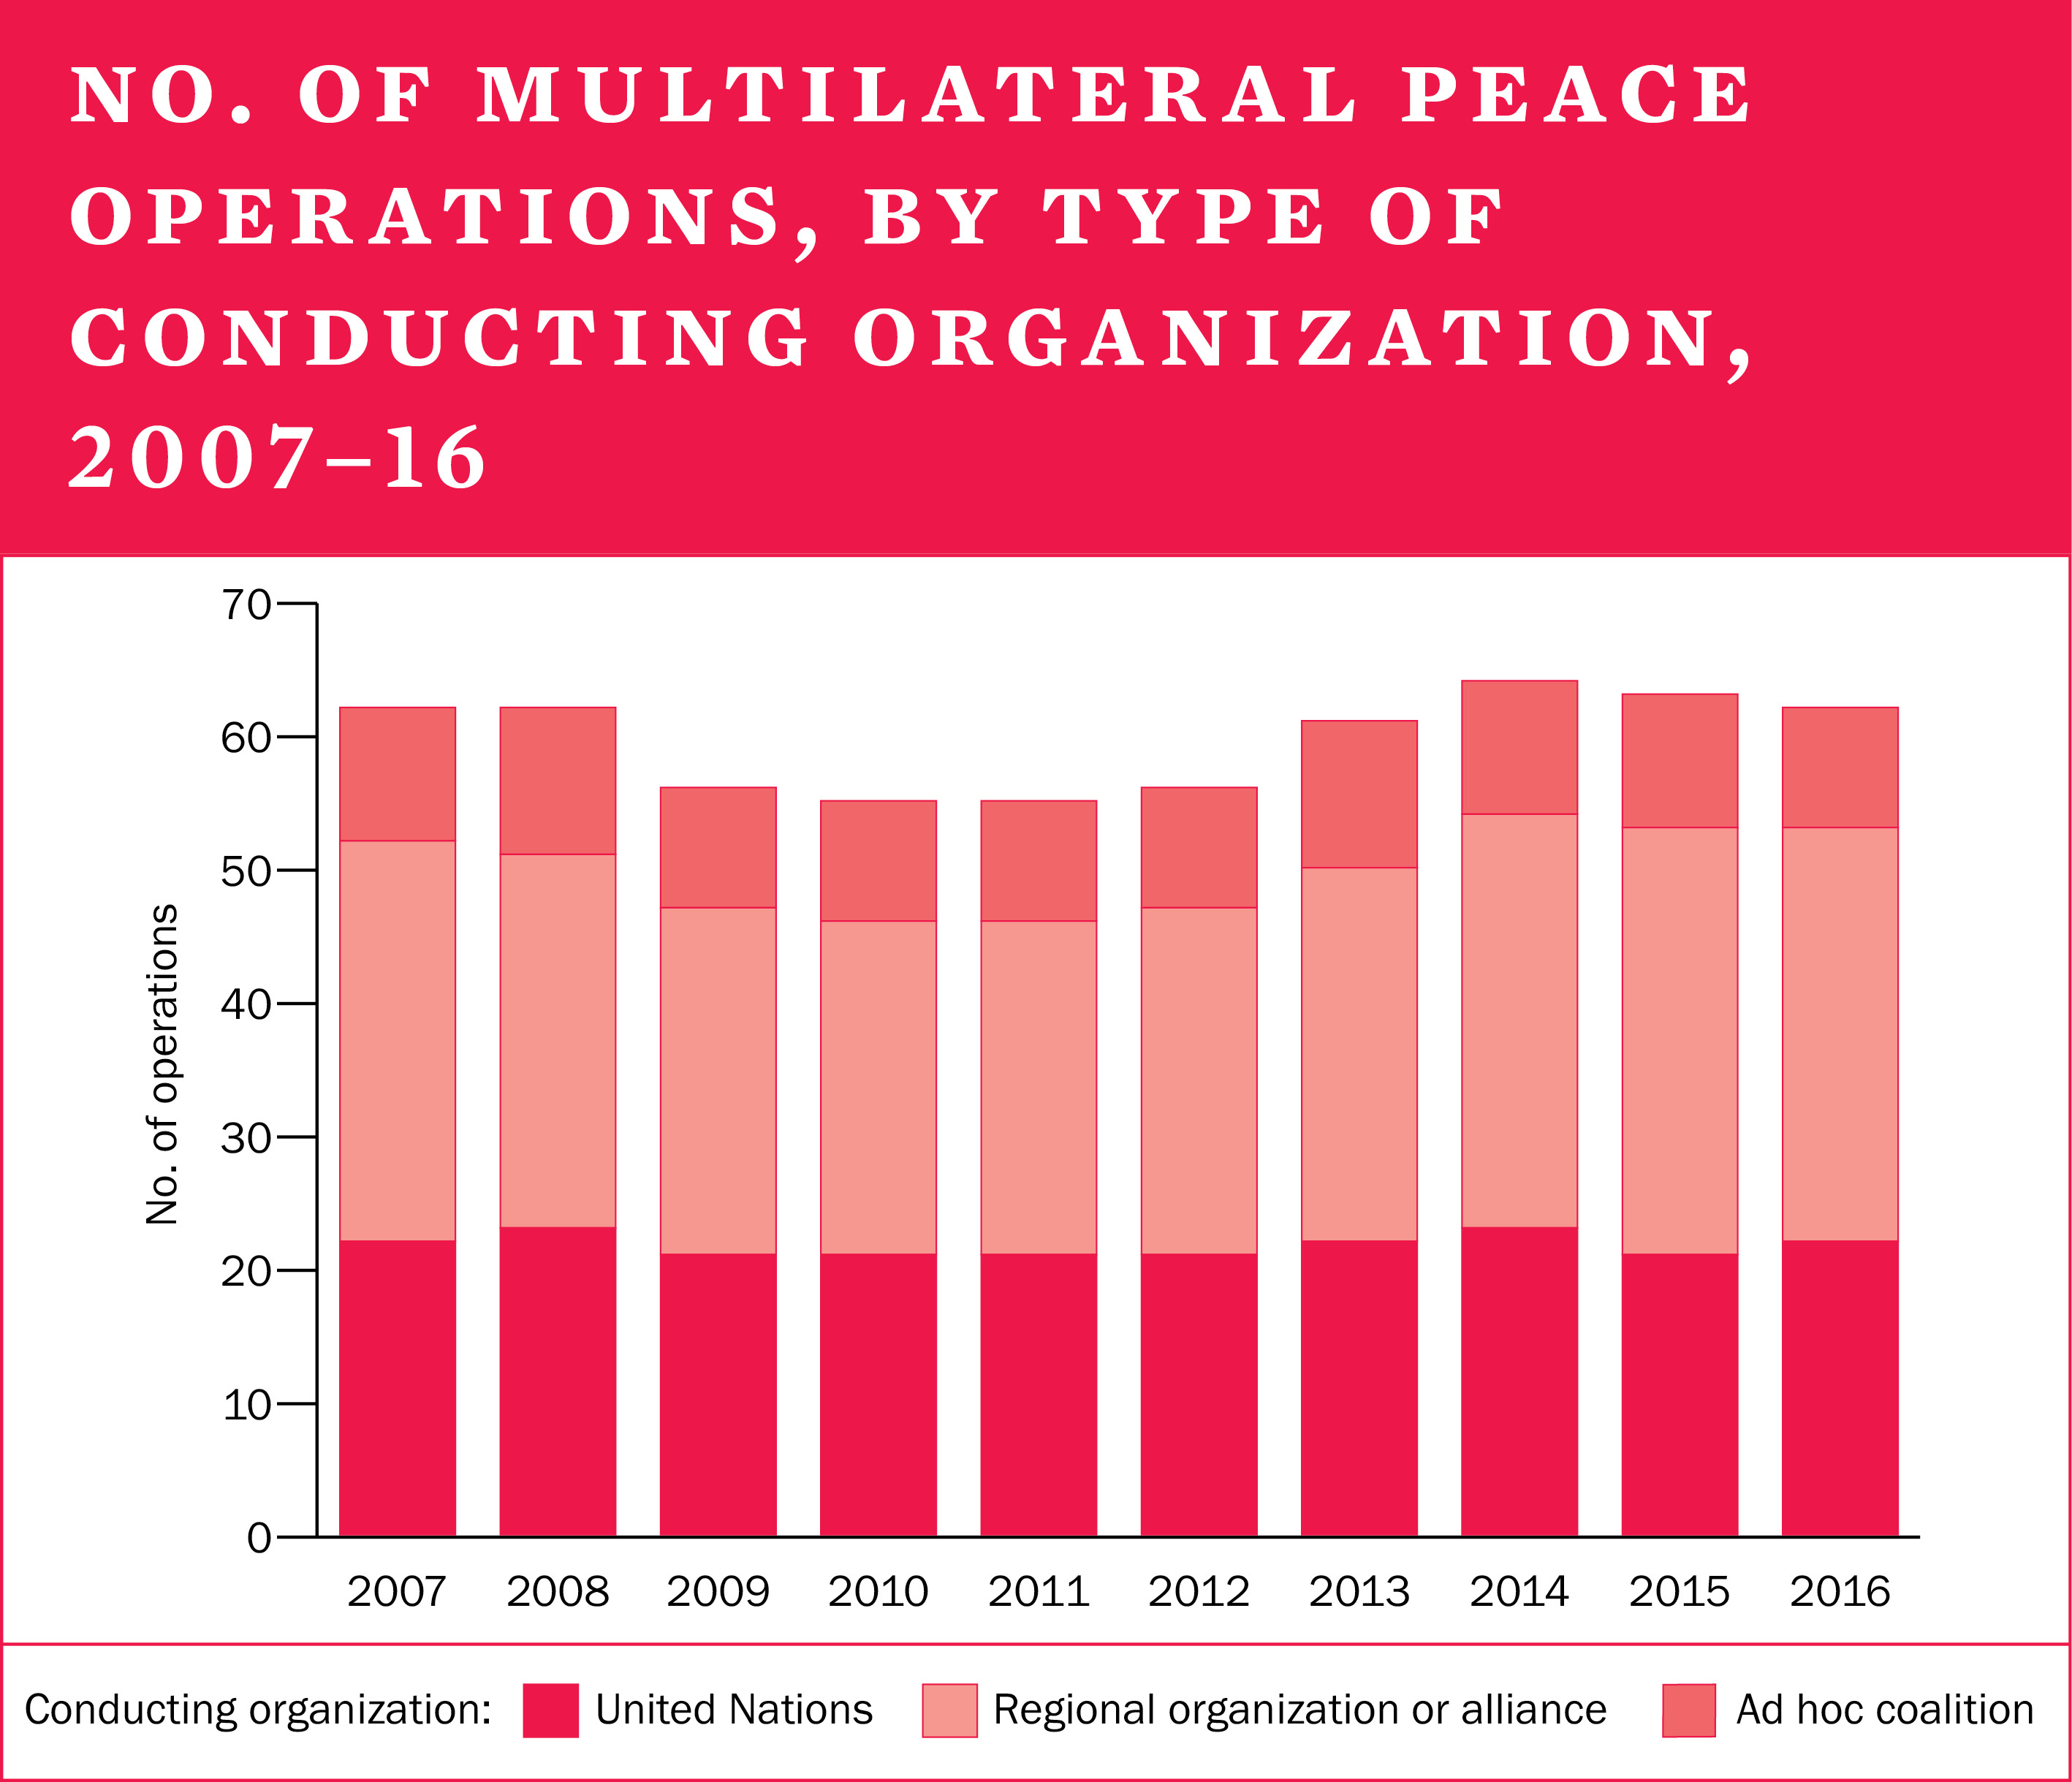 No. of multilateral peace operations, by type of conducting organization, 2007-16